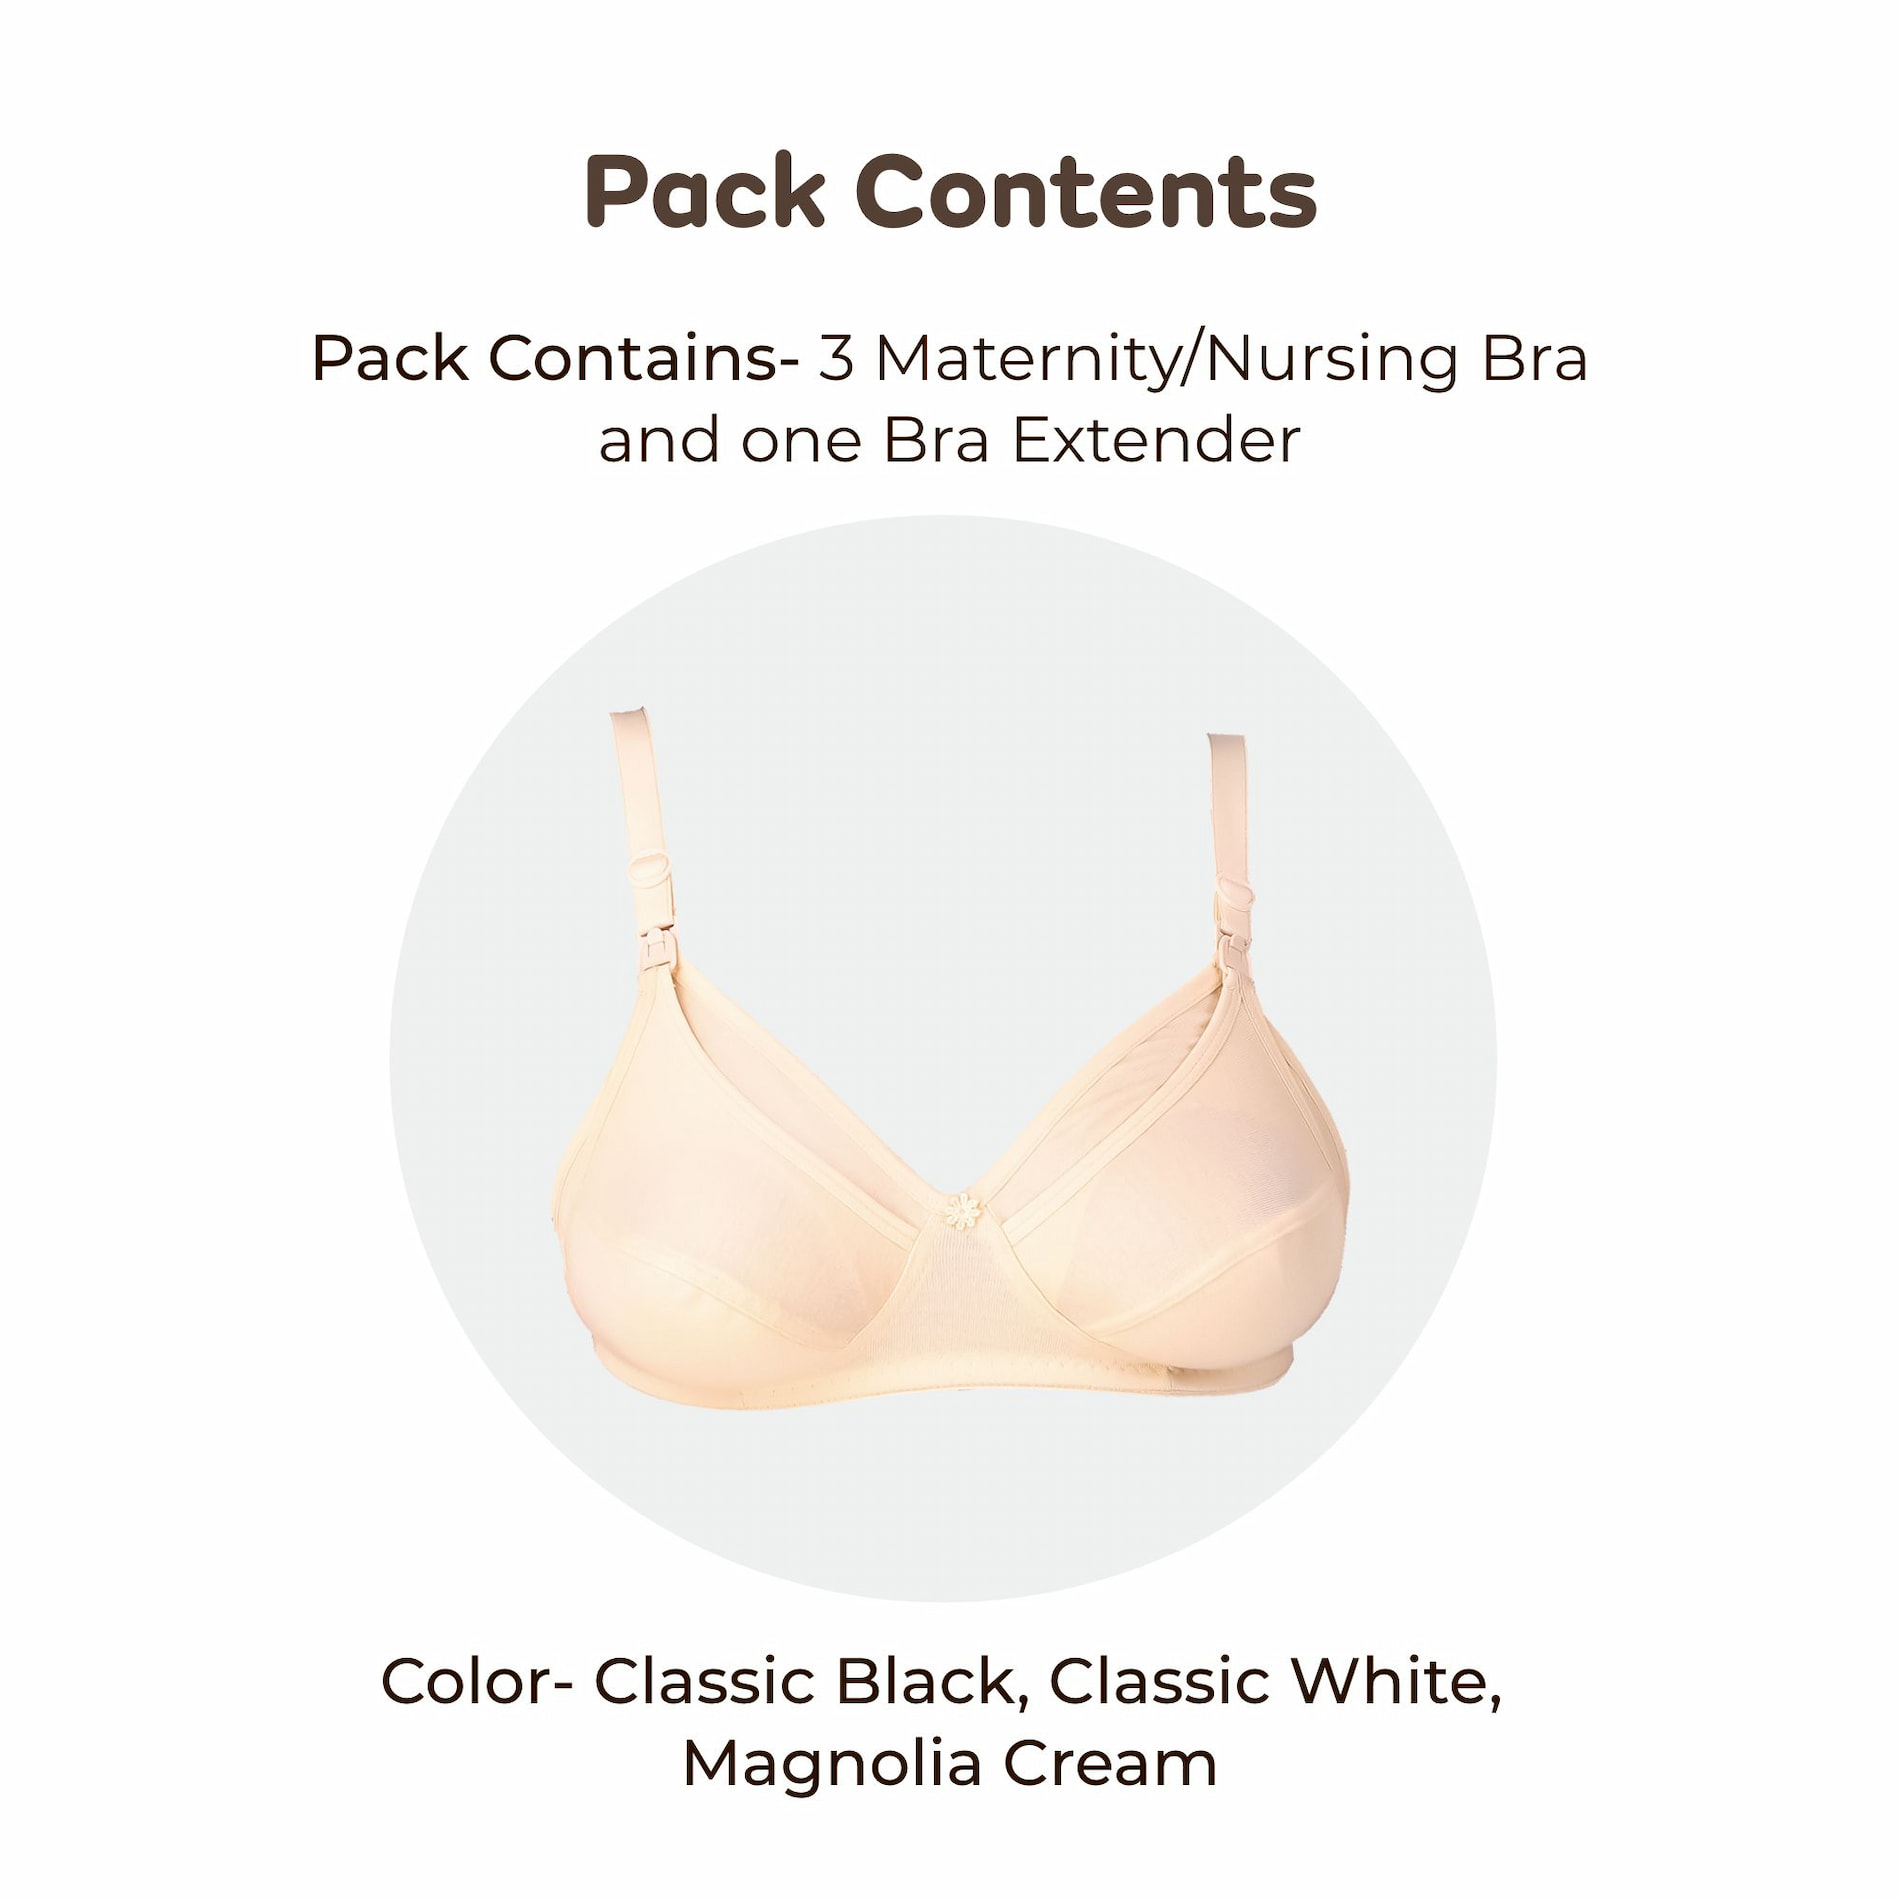 Maternity/Nursing Bras Non-Wired, Non-Padded - Pack of 3 with free Bra Extender (Classic Black, Classic White, Magnolia Cream) 30 B